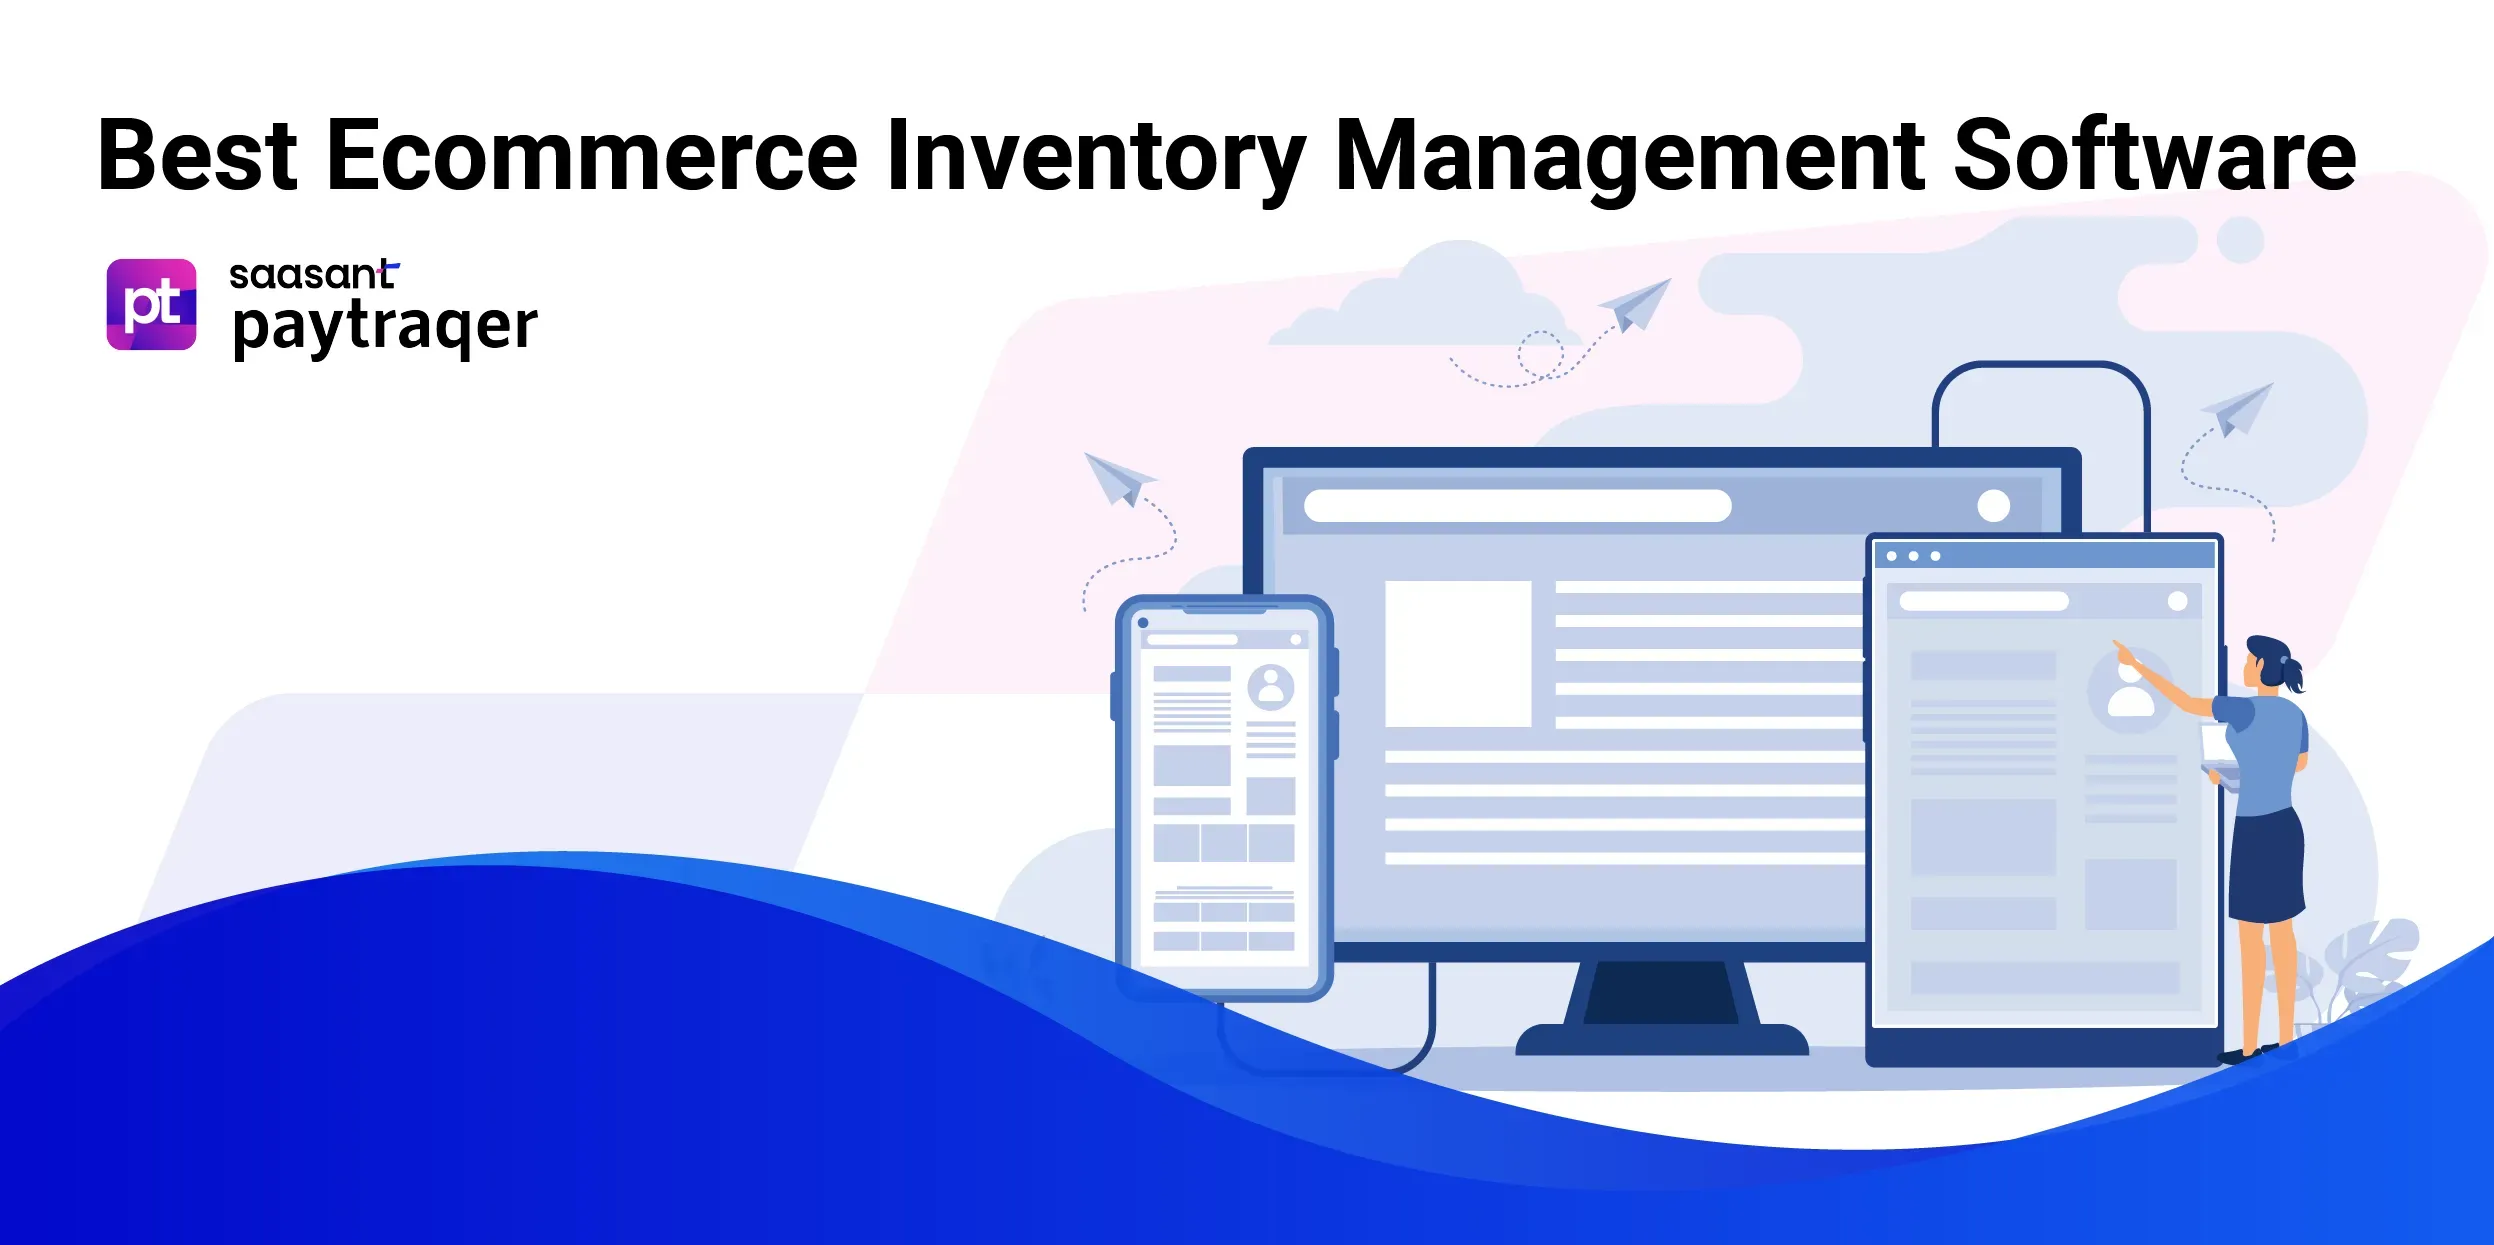 Best E-commerce Inventory Management Software for Small Businesses